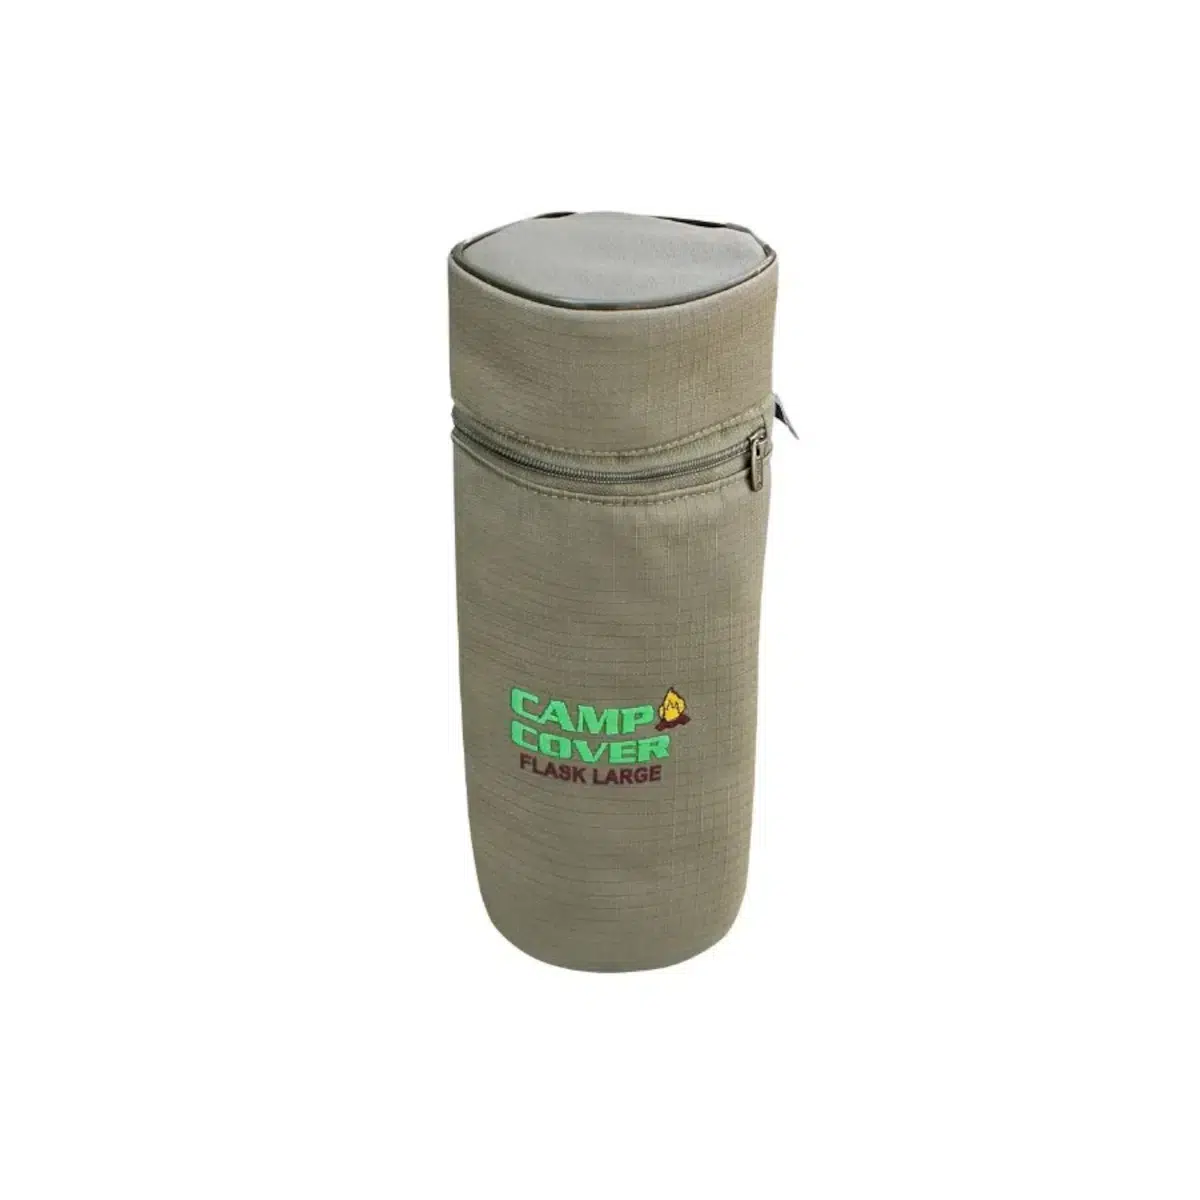 Camp Cover Flask Cover Large